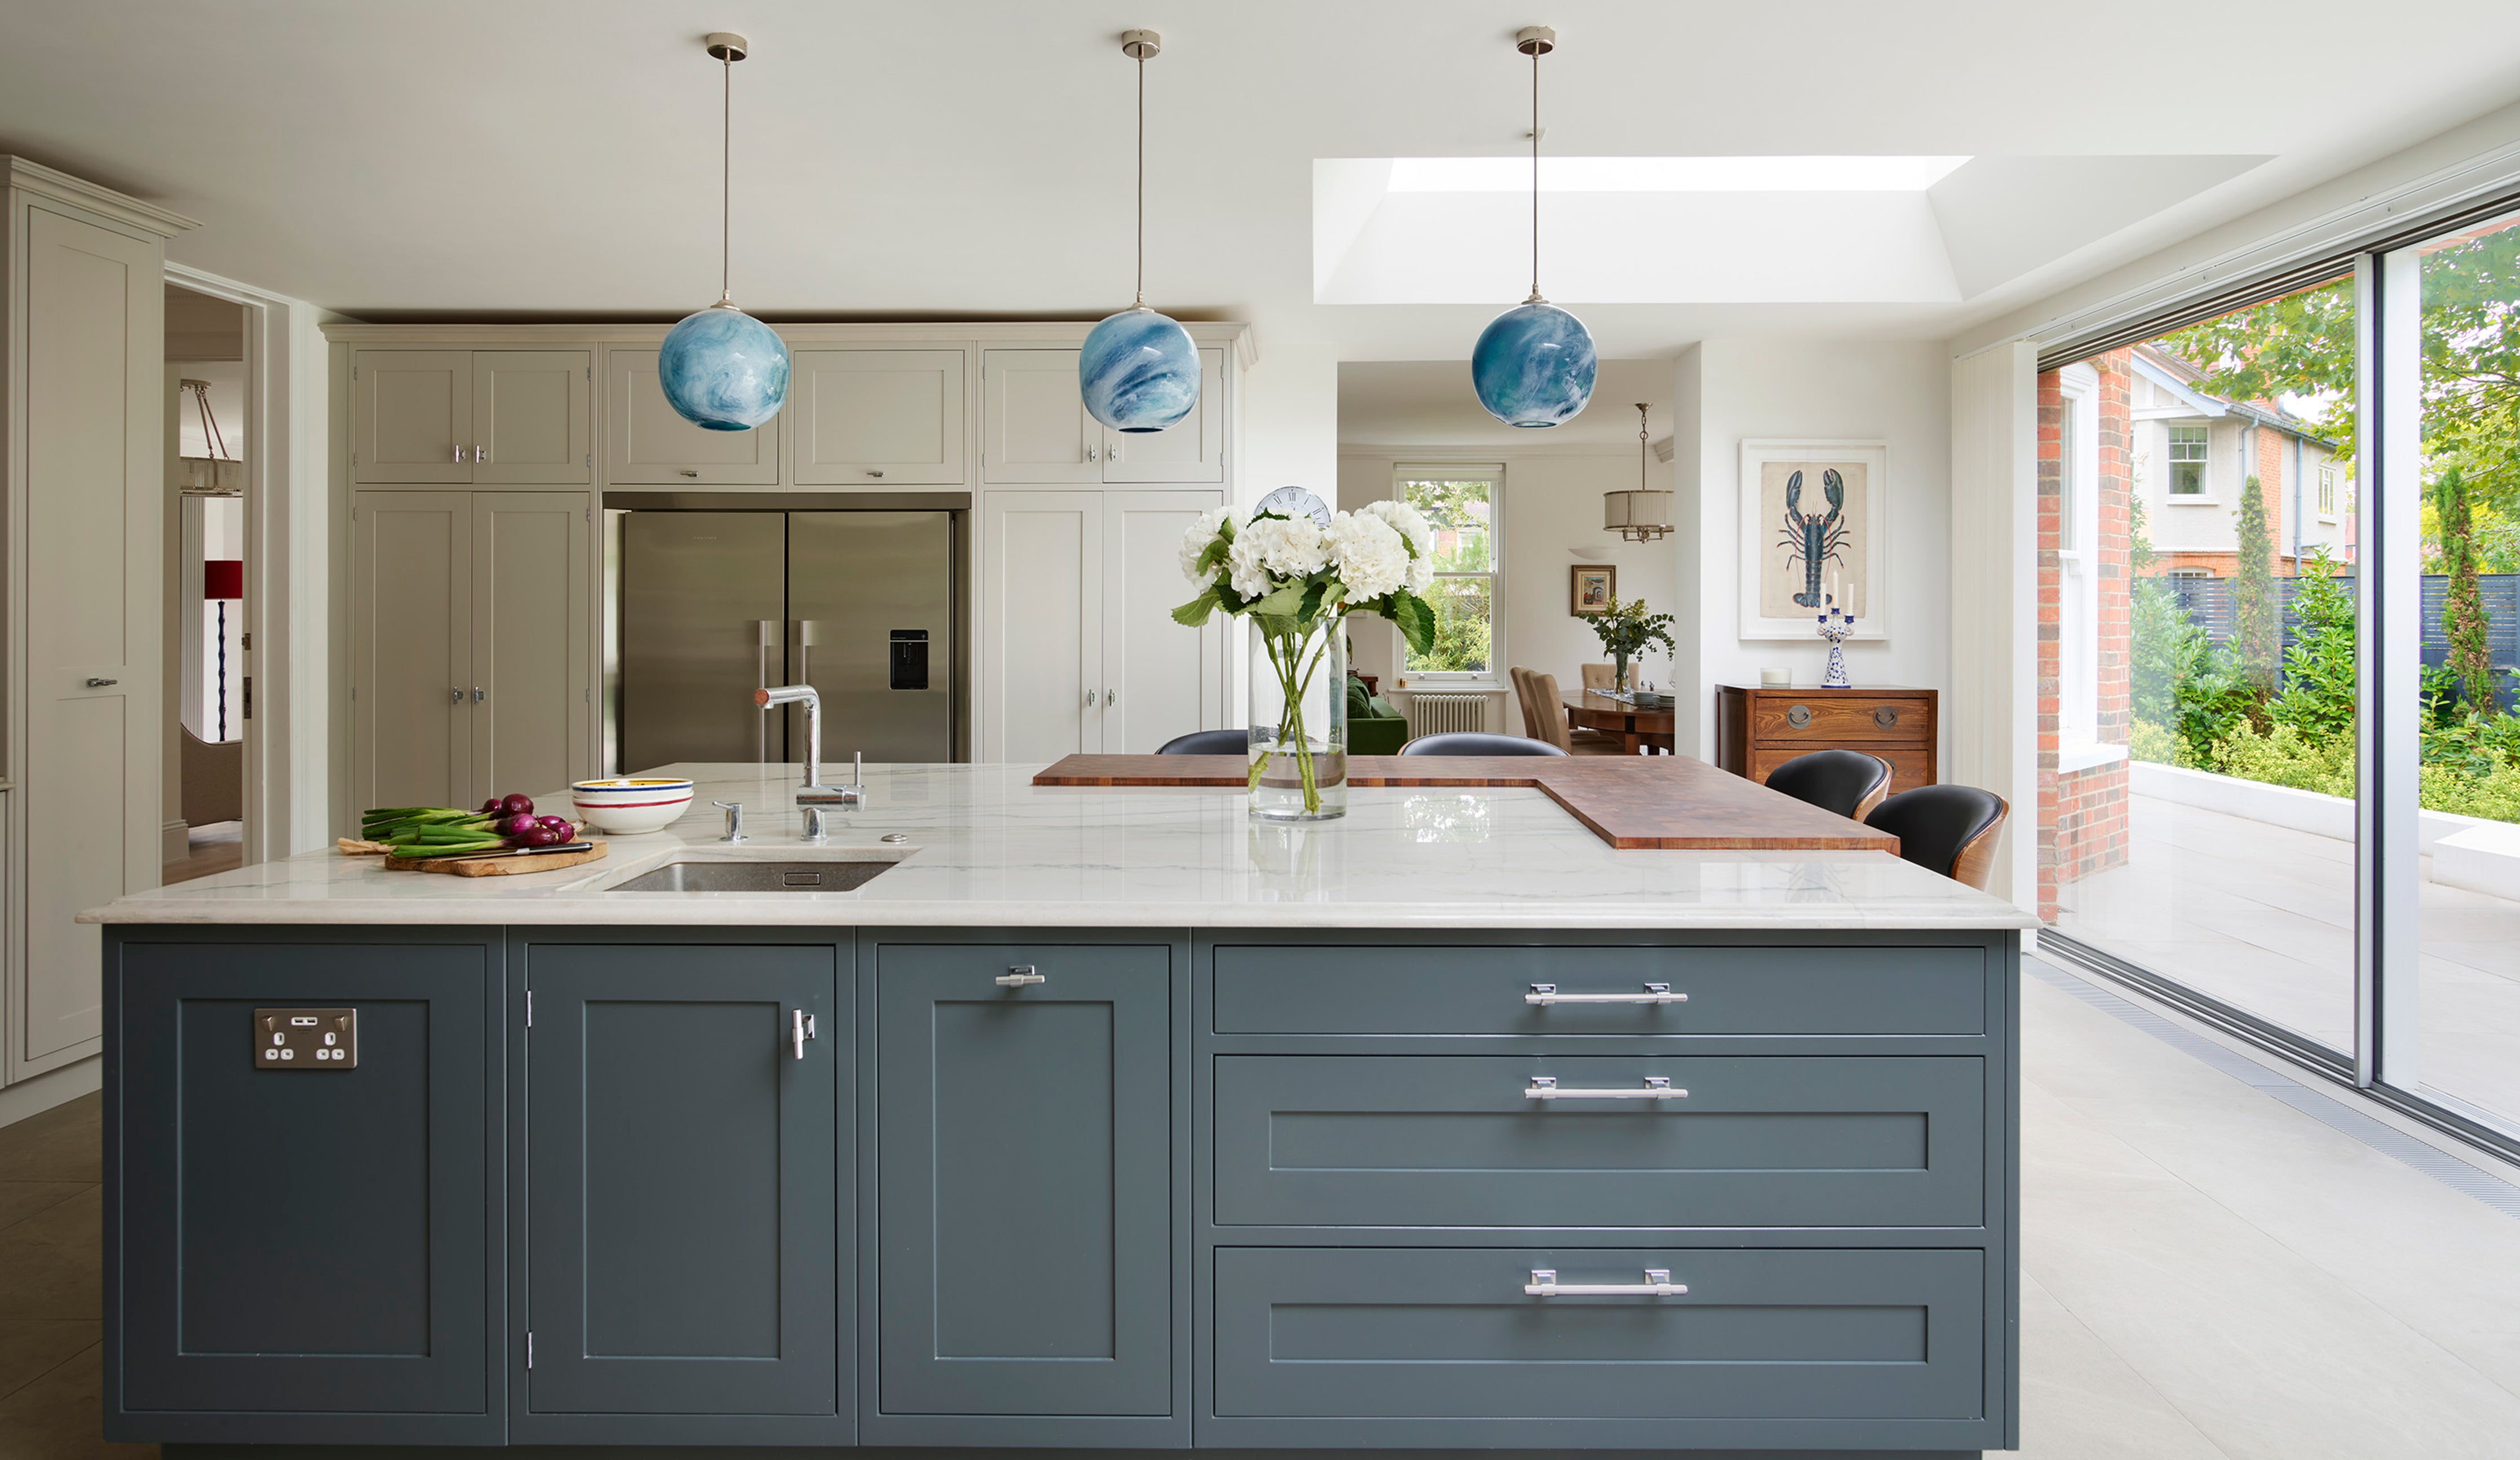 Rothschild &amp; Bickers Mineral Pendant Large - Lazurite Aqua, hanging over kitchen island design by Lisa Ryde Properties